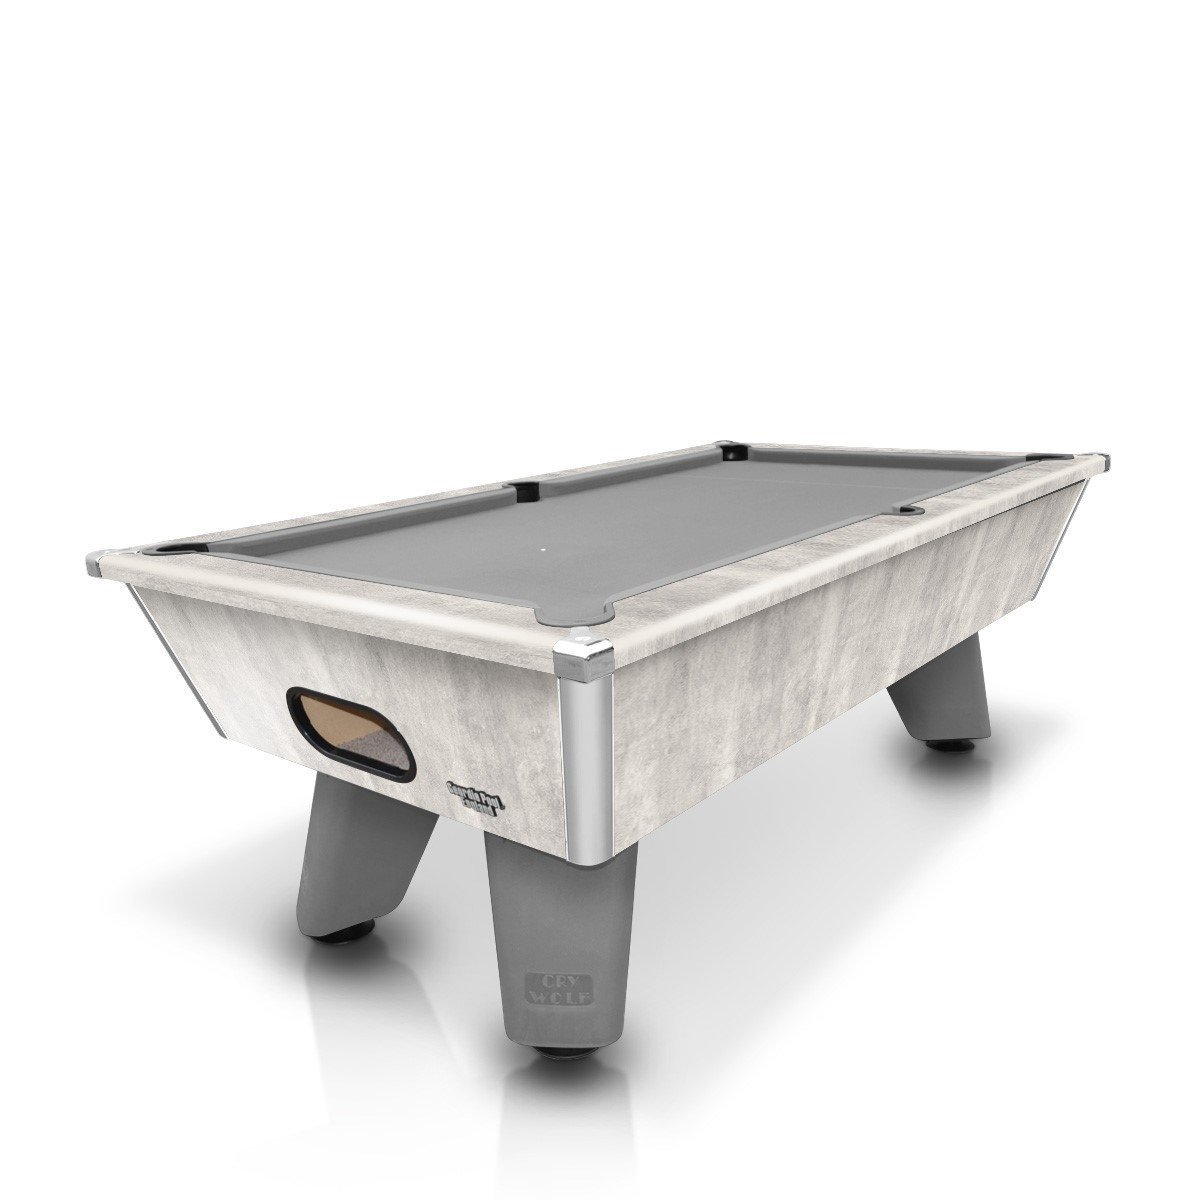 Image of Cry Wolf 7ft English Pool Table - Urban Grey